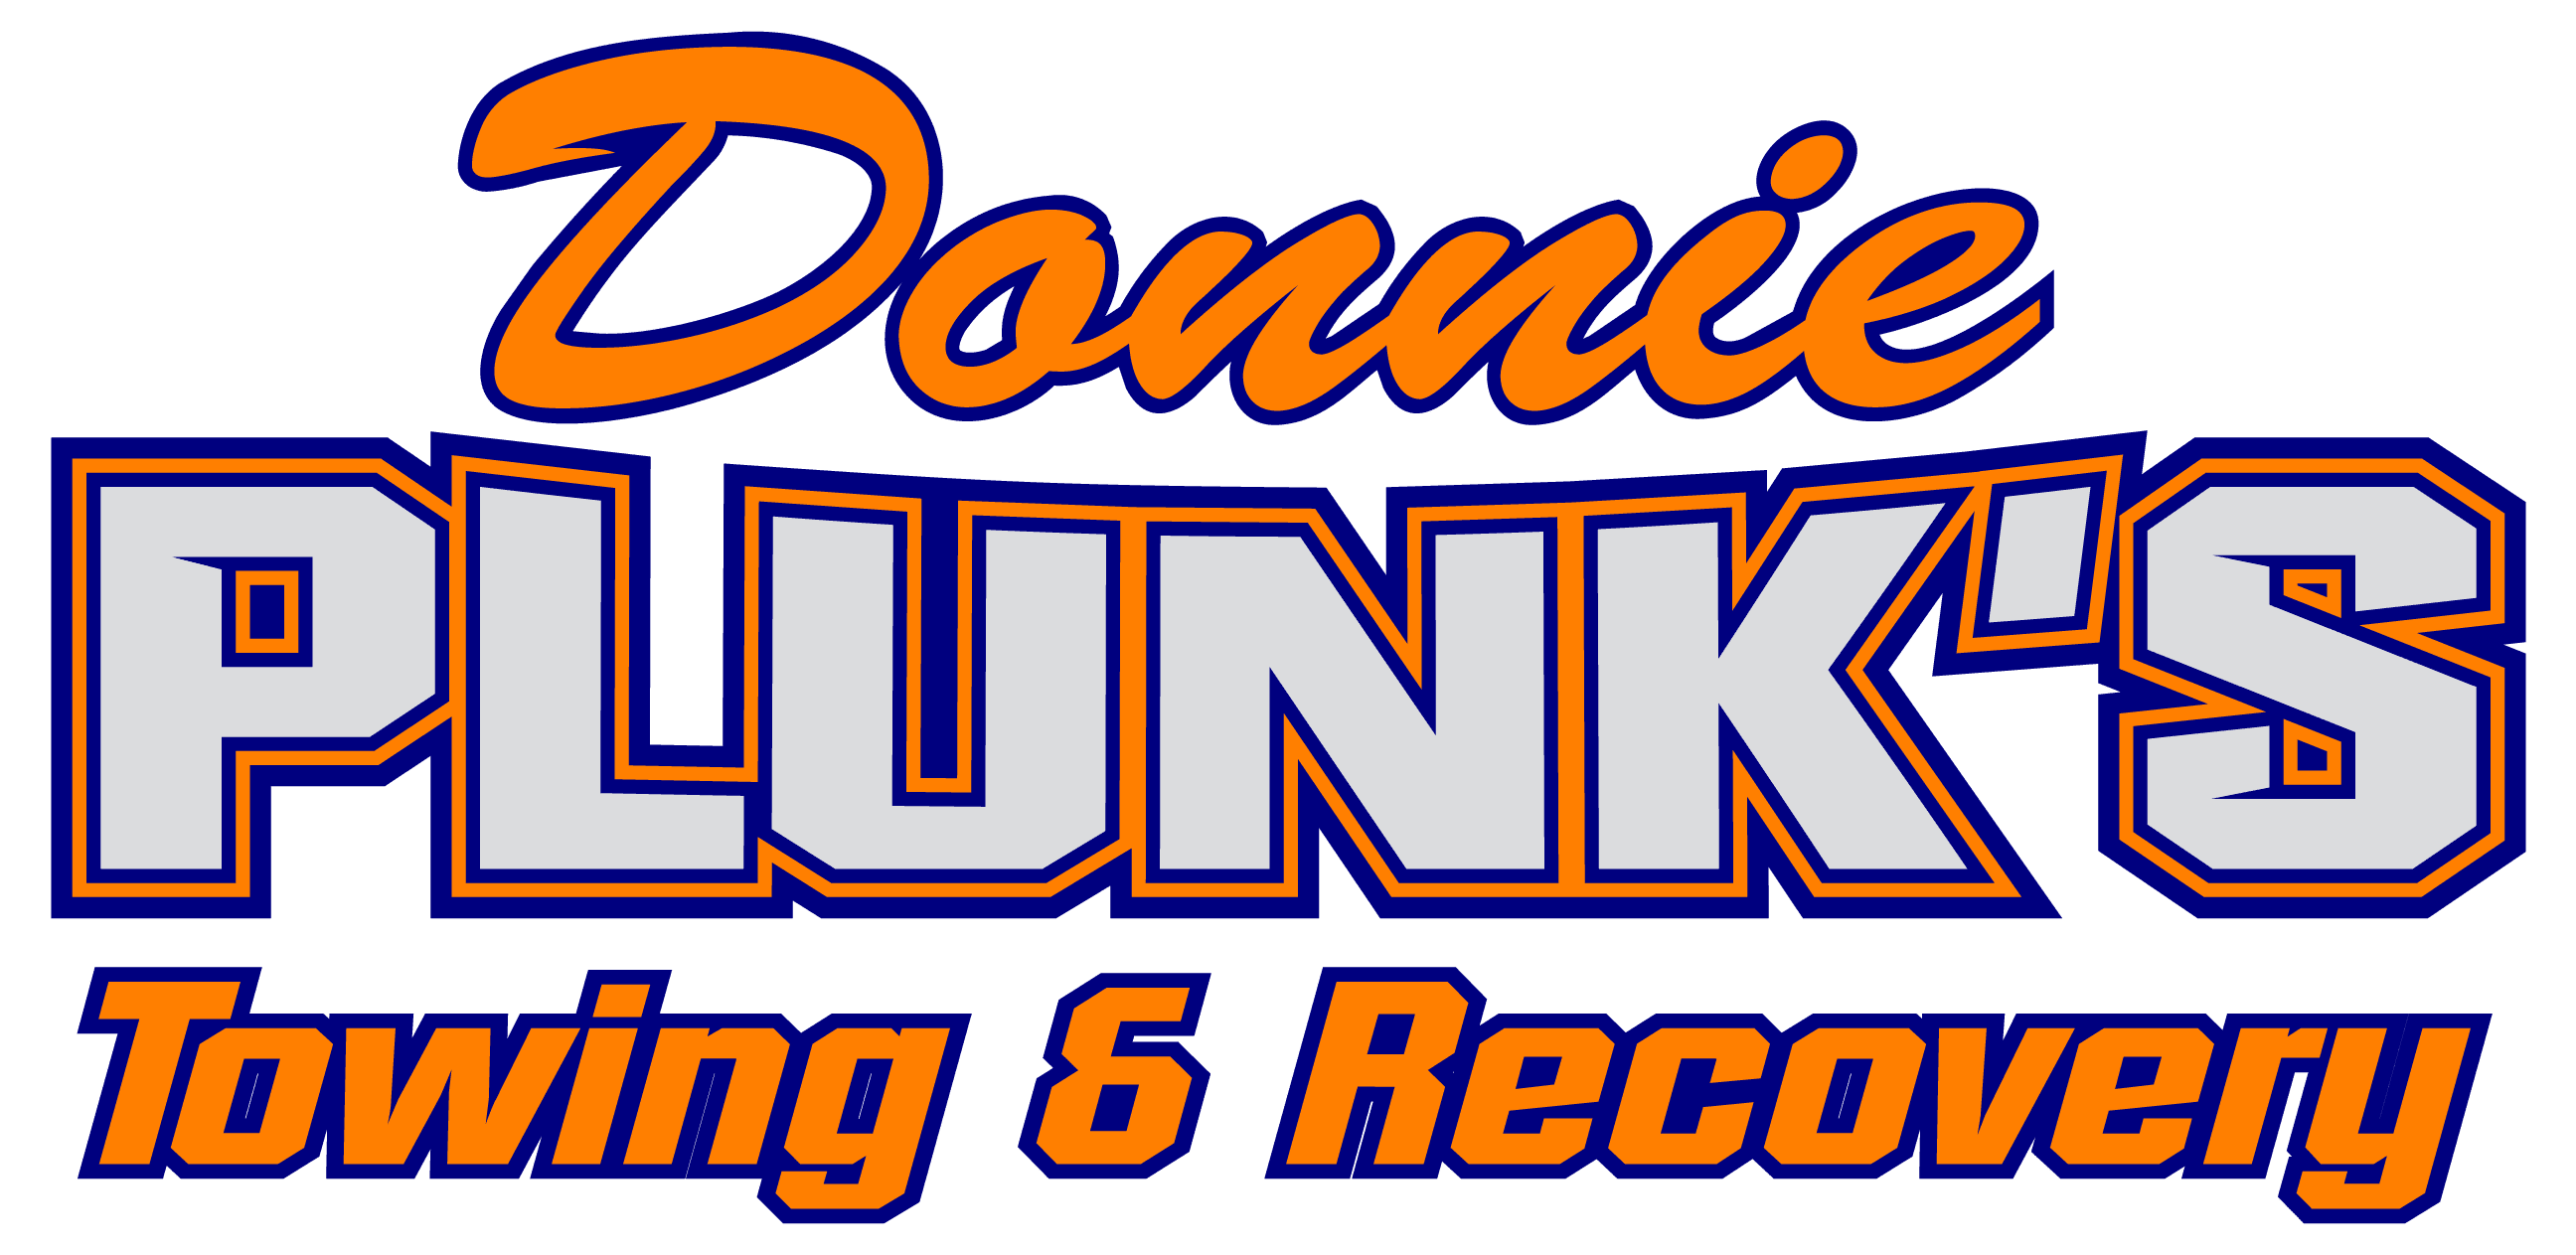 Donnie Plunk’s Towing & Recovery Logo|West Monroe, LA